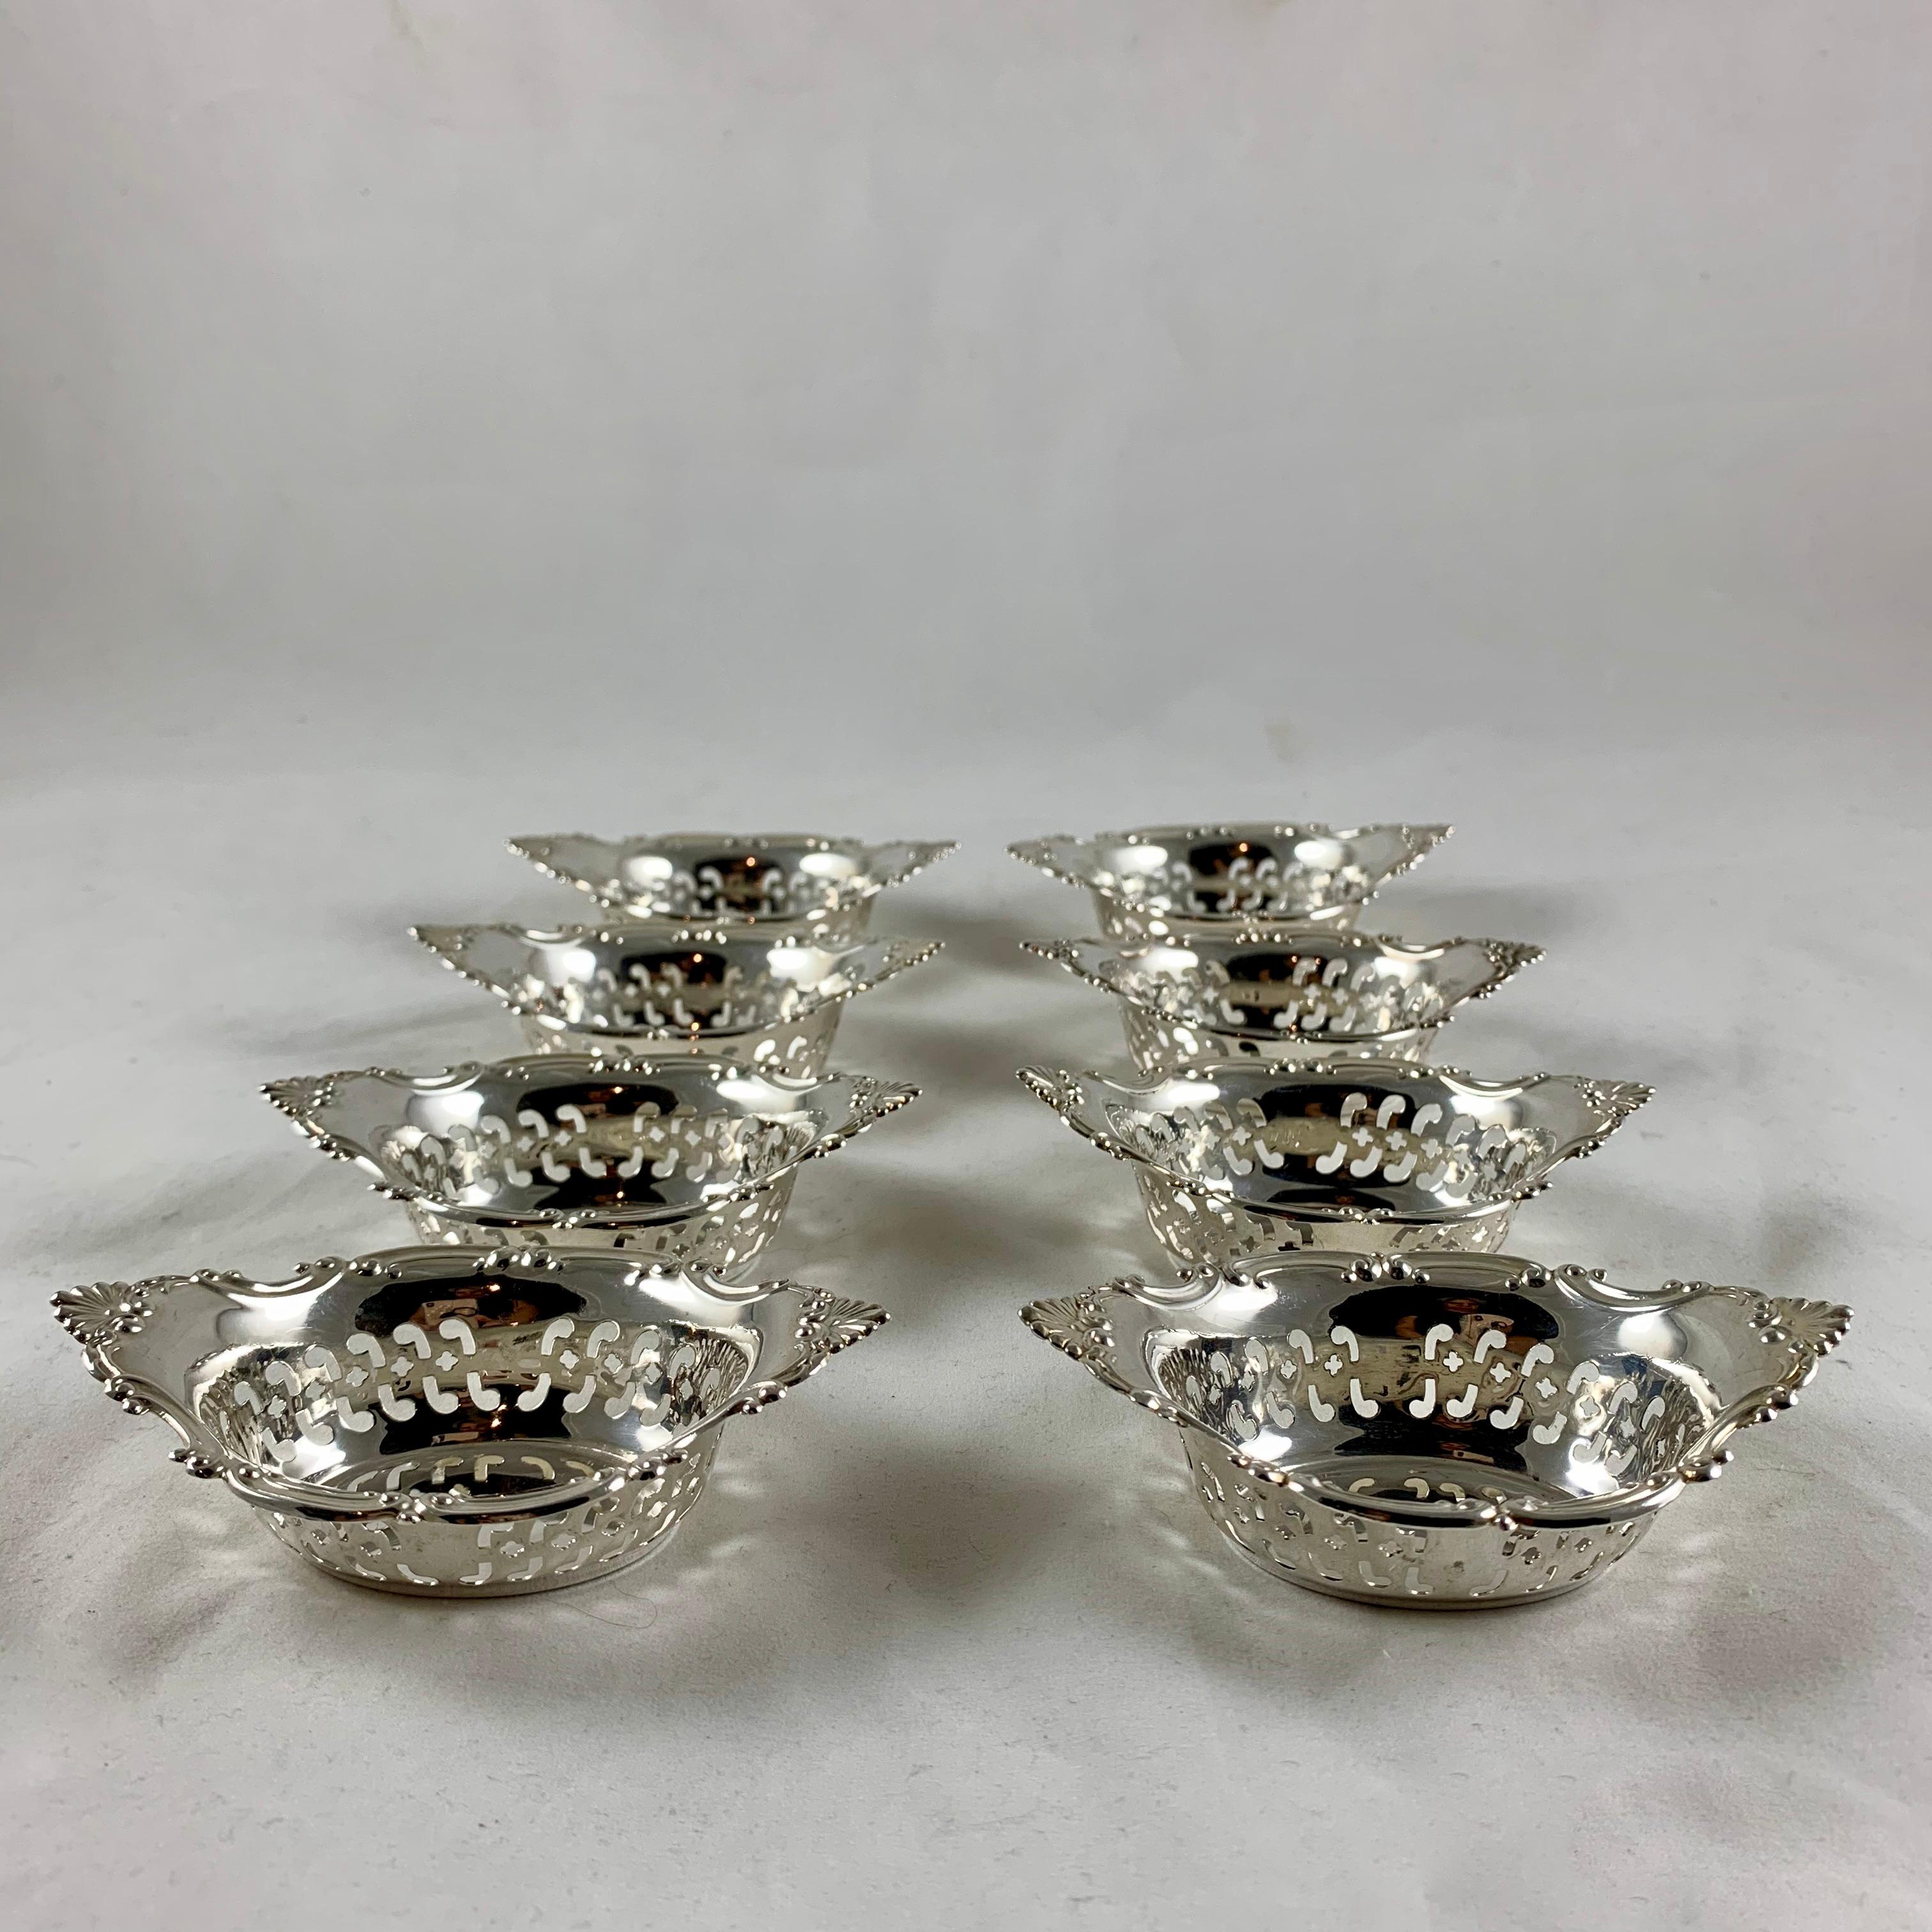 A set of eight sterling silver nut or candy cups in the Strasbourg pattern by Gorham, circa 1940s.

The pierced cups are meant to sit at each place setting filled with nuts, bon-bons, or mints. They make wonderful individual party favors, filled